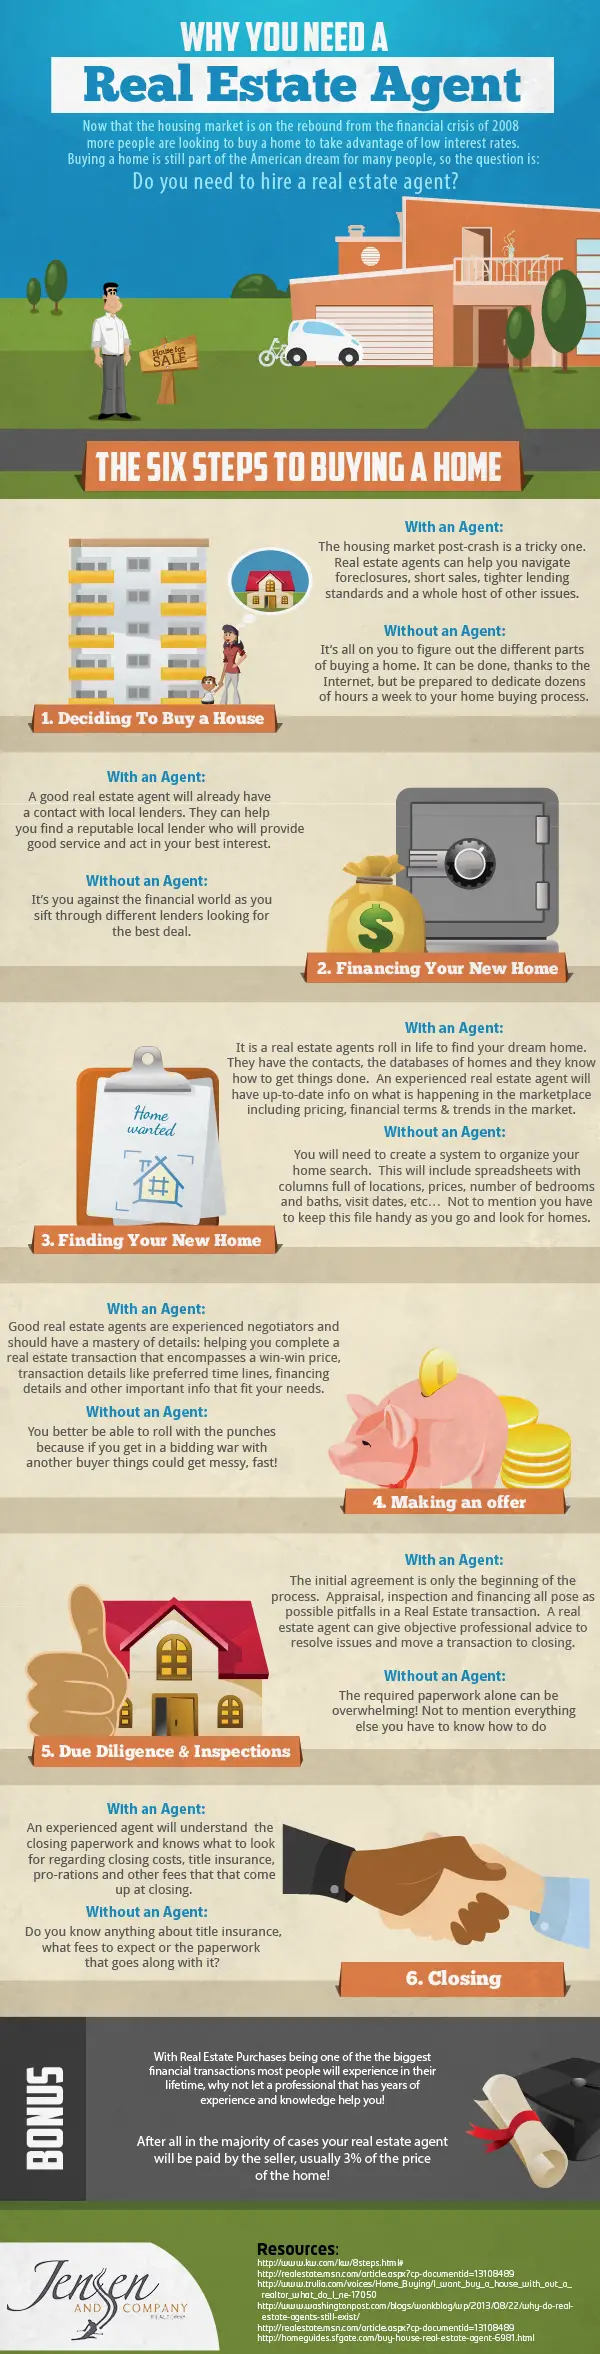 why you need a real estate agent infographic